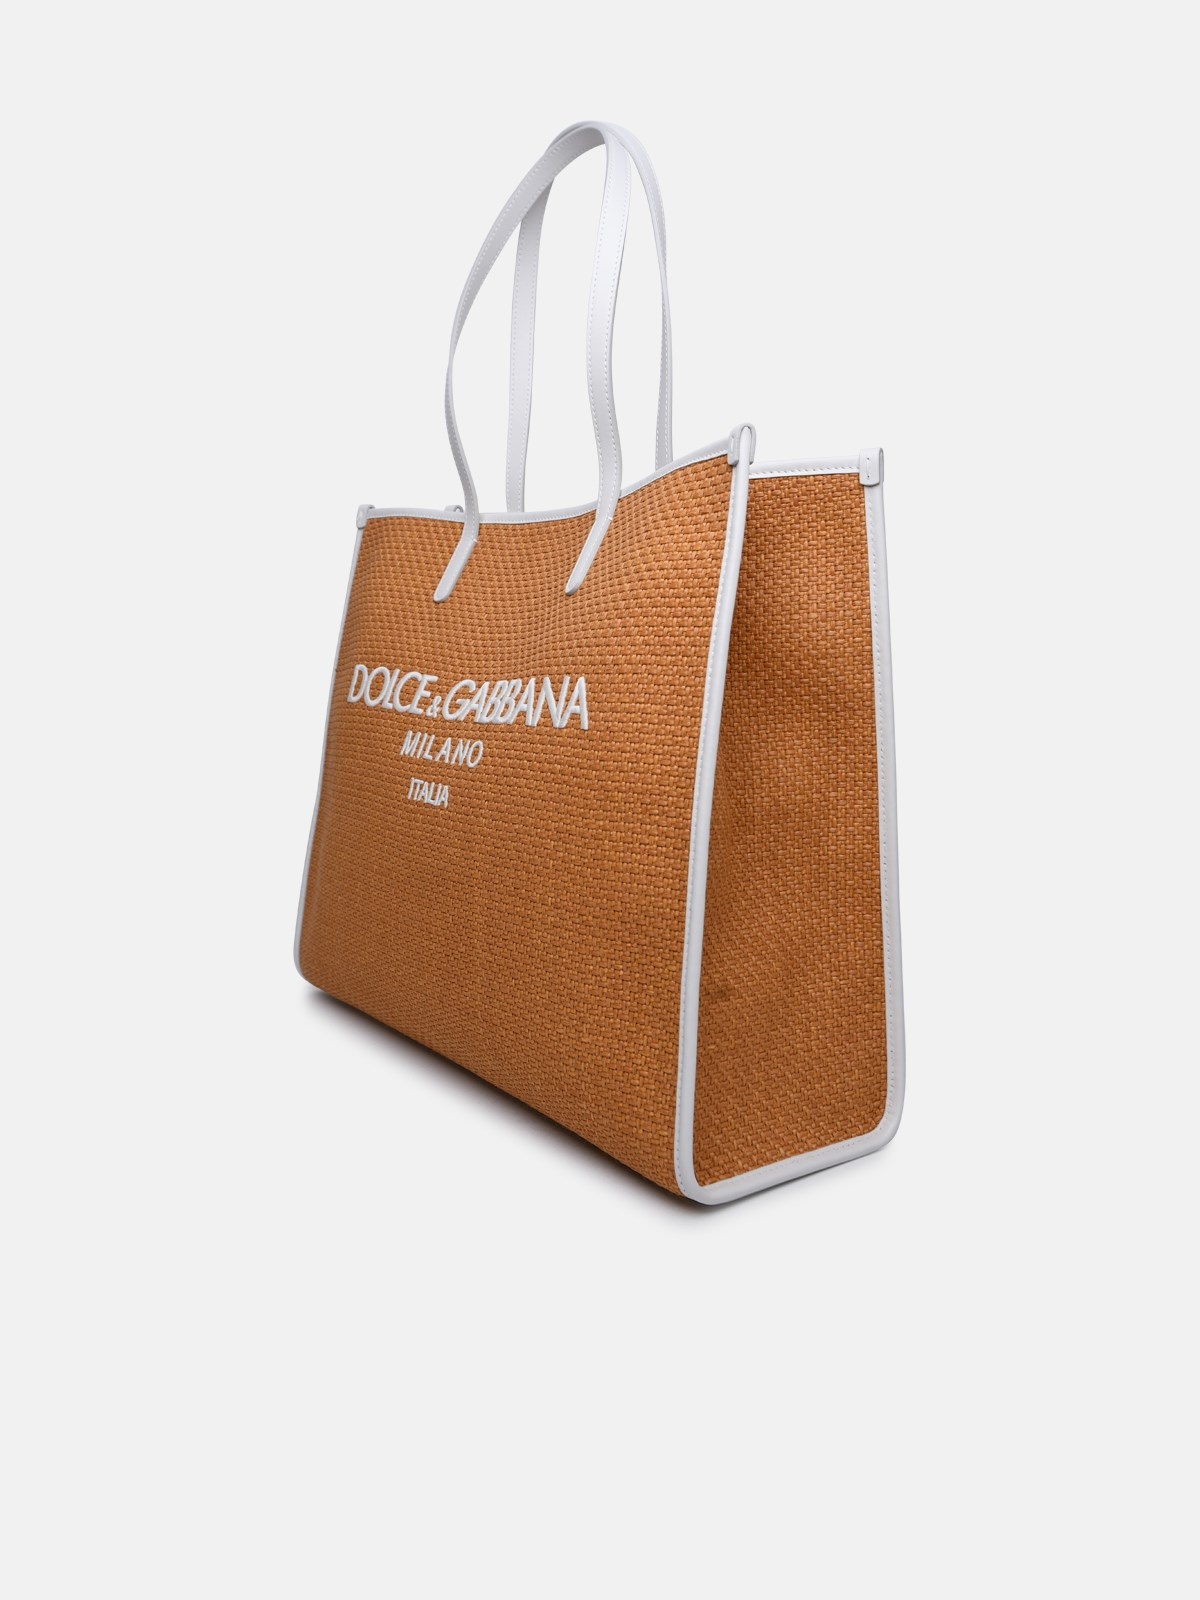 LARGE SHOPPING BAG IN BEIGE COTTON BLEND - 2